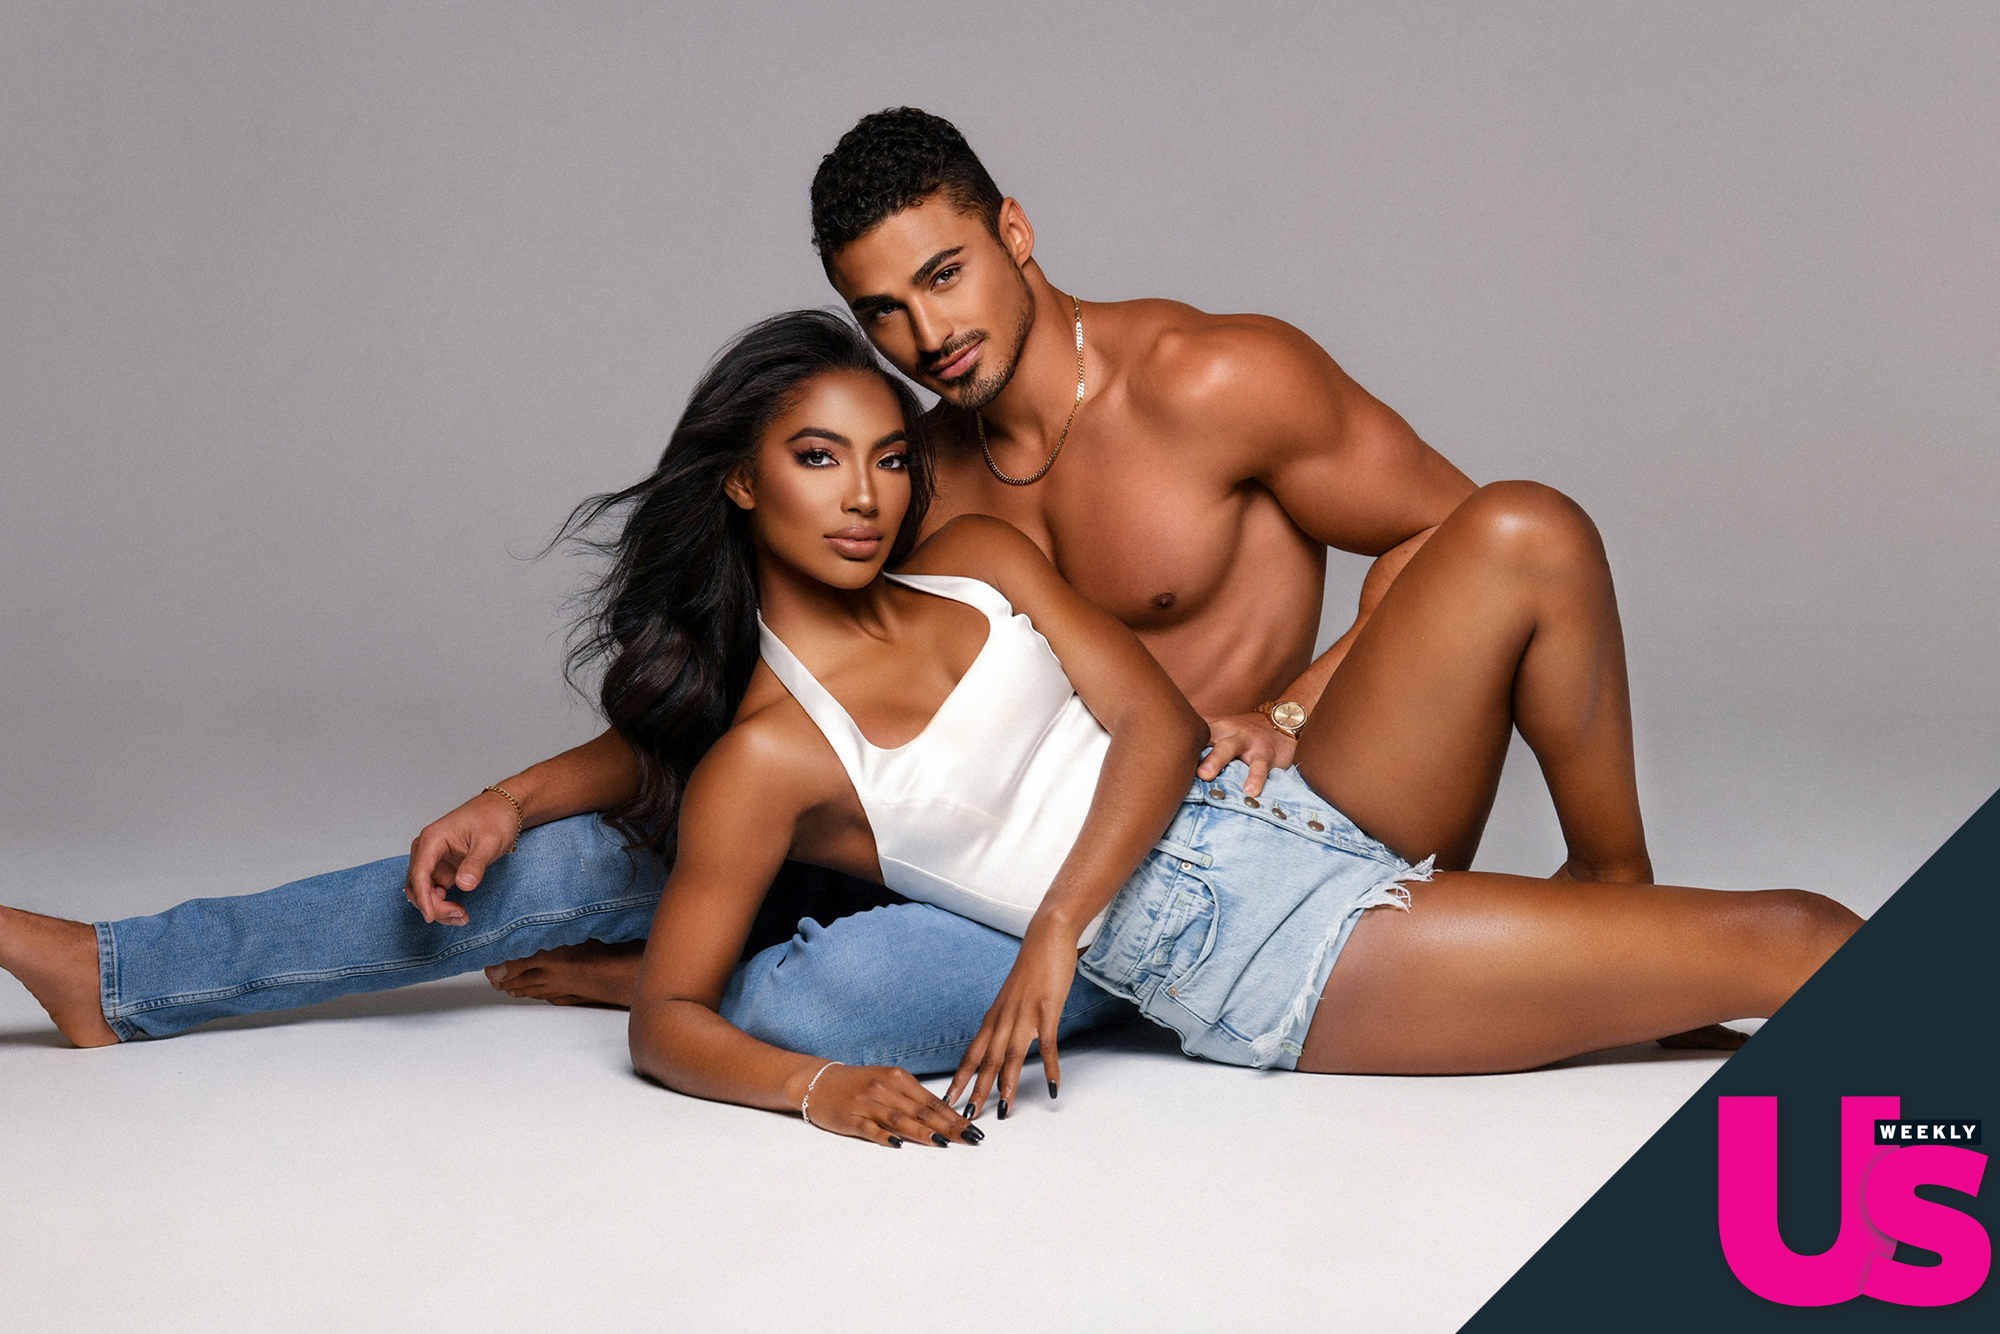 Big Brother's Taylor and Joseph Pose for Sexy Anniversary Photos